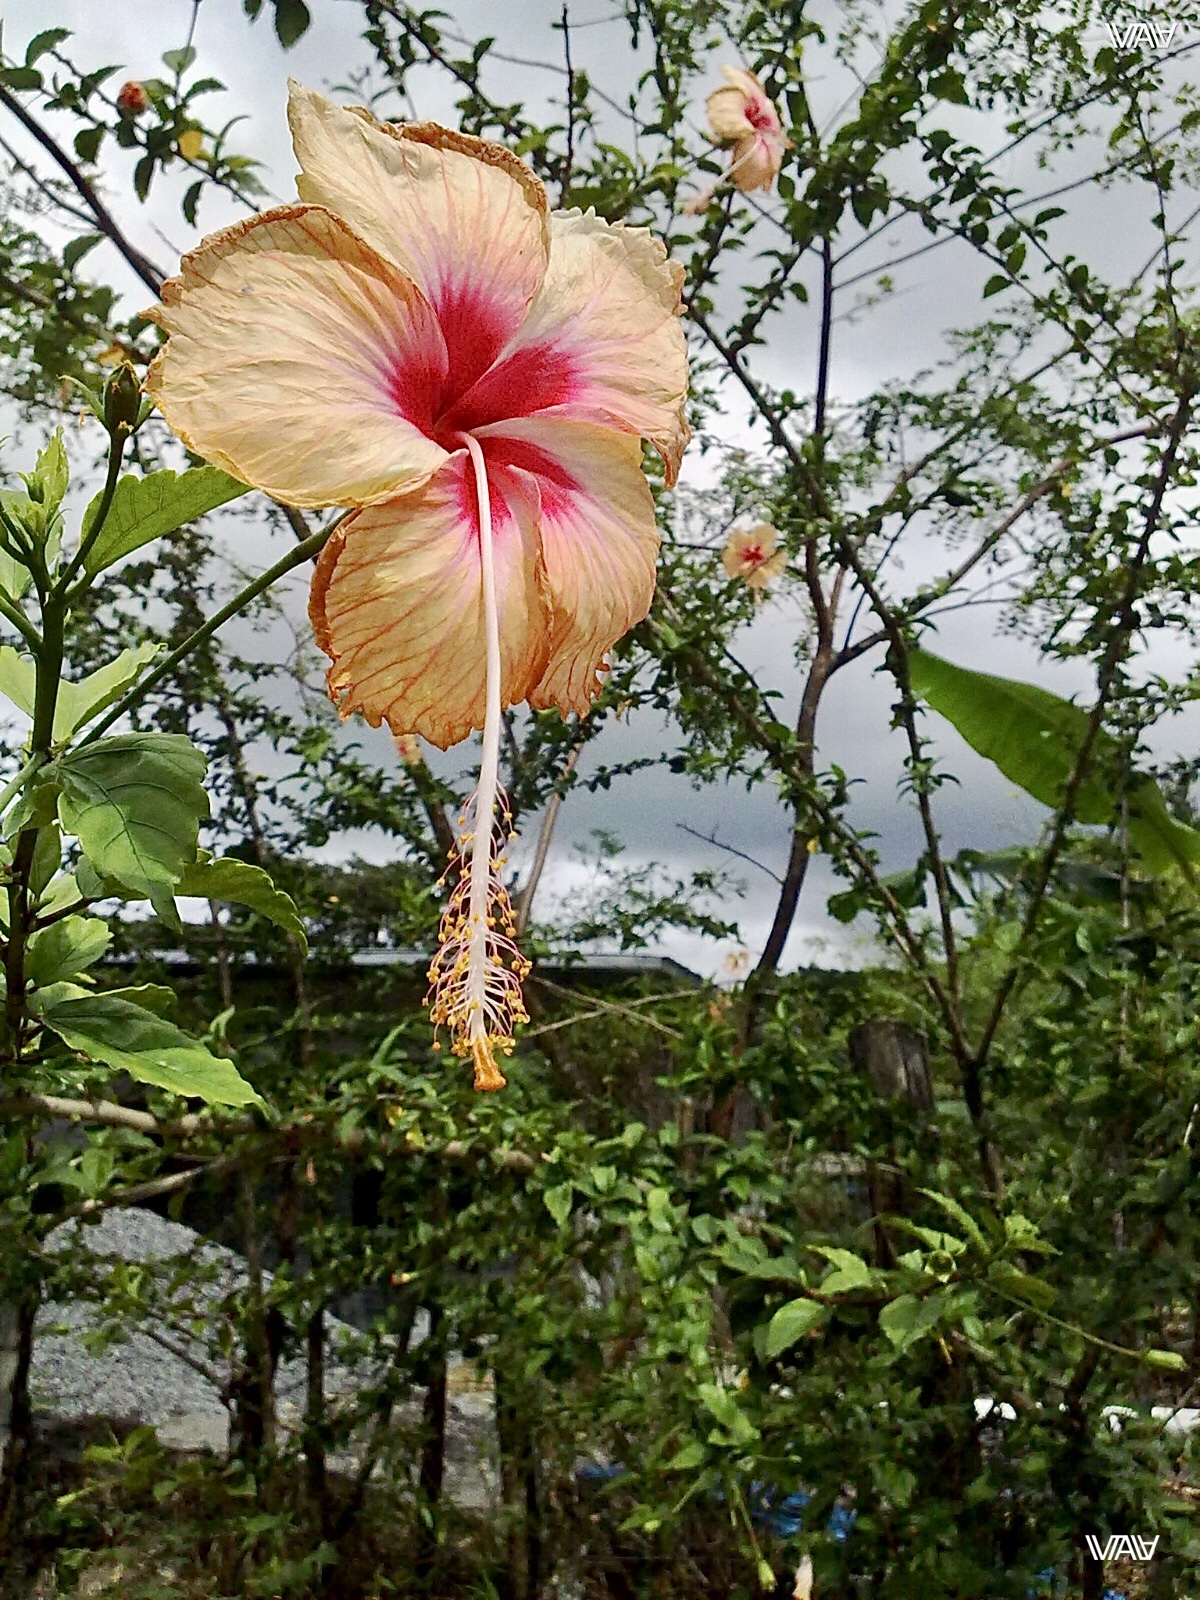 Unbelievable beautiful flowers from fairy tales. Hot Springs, Panama 